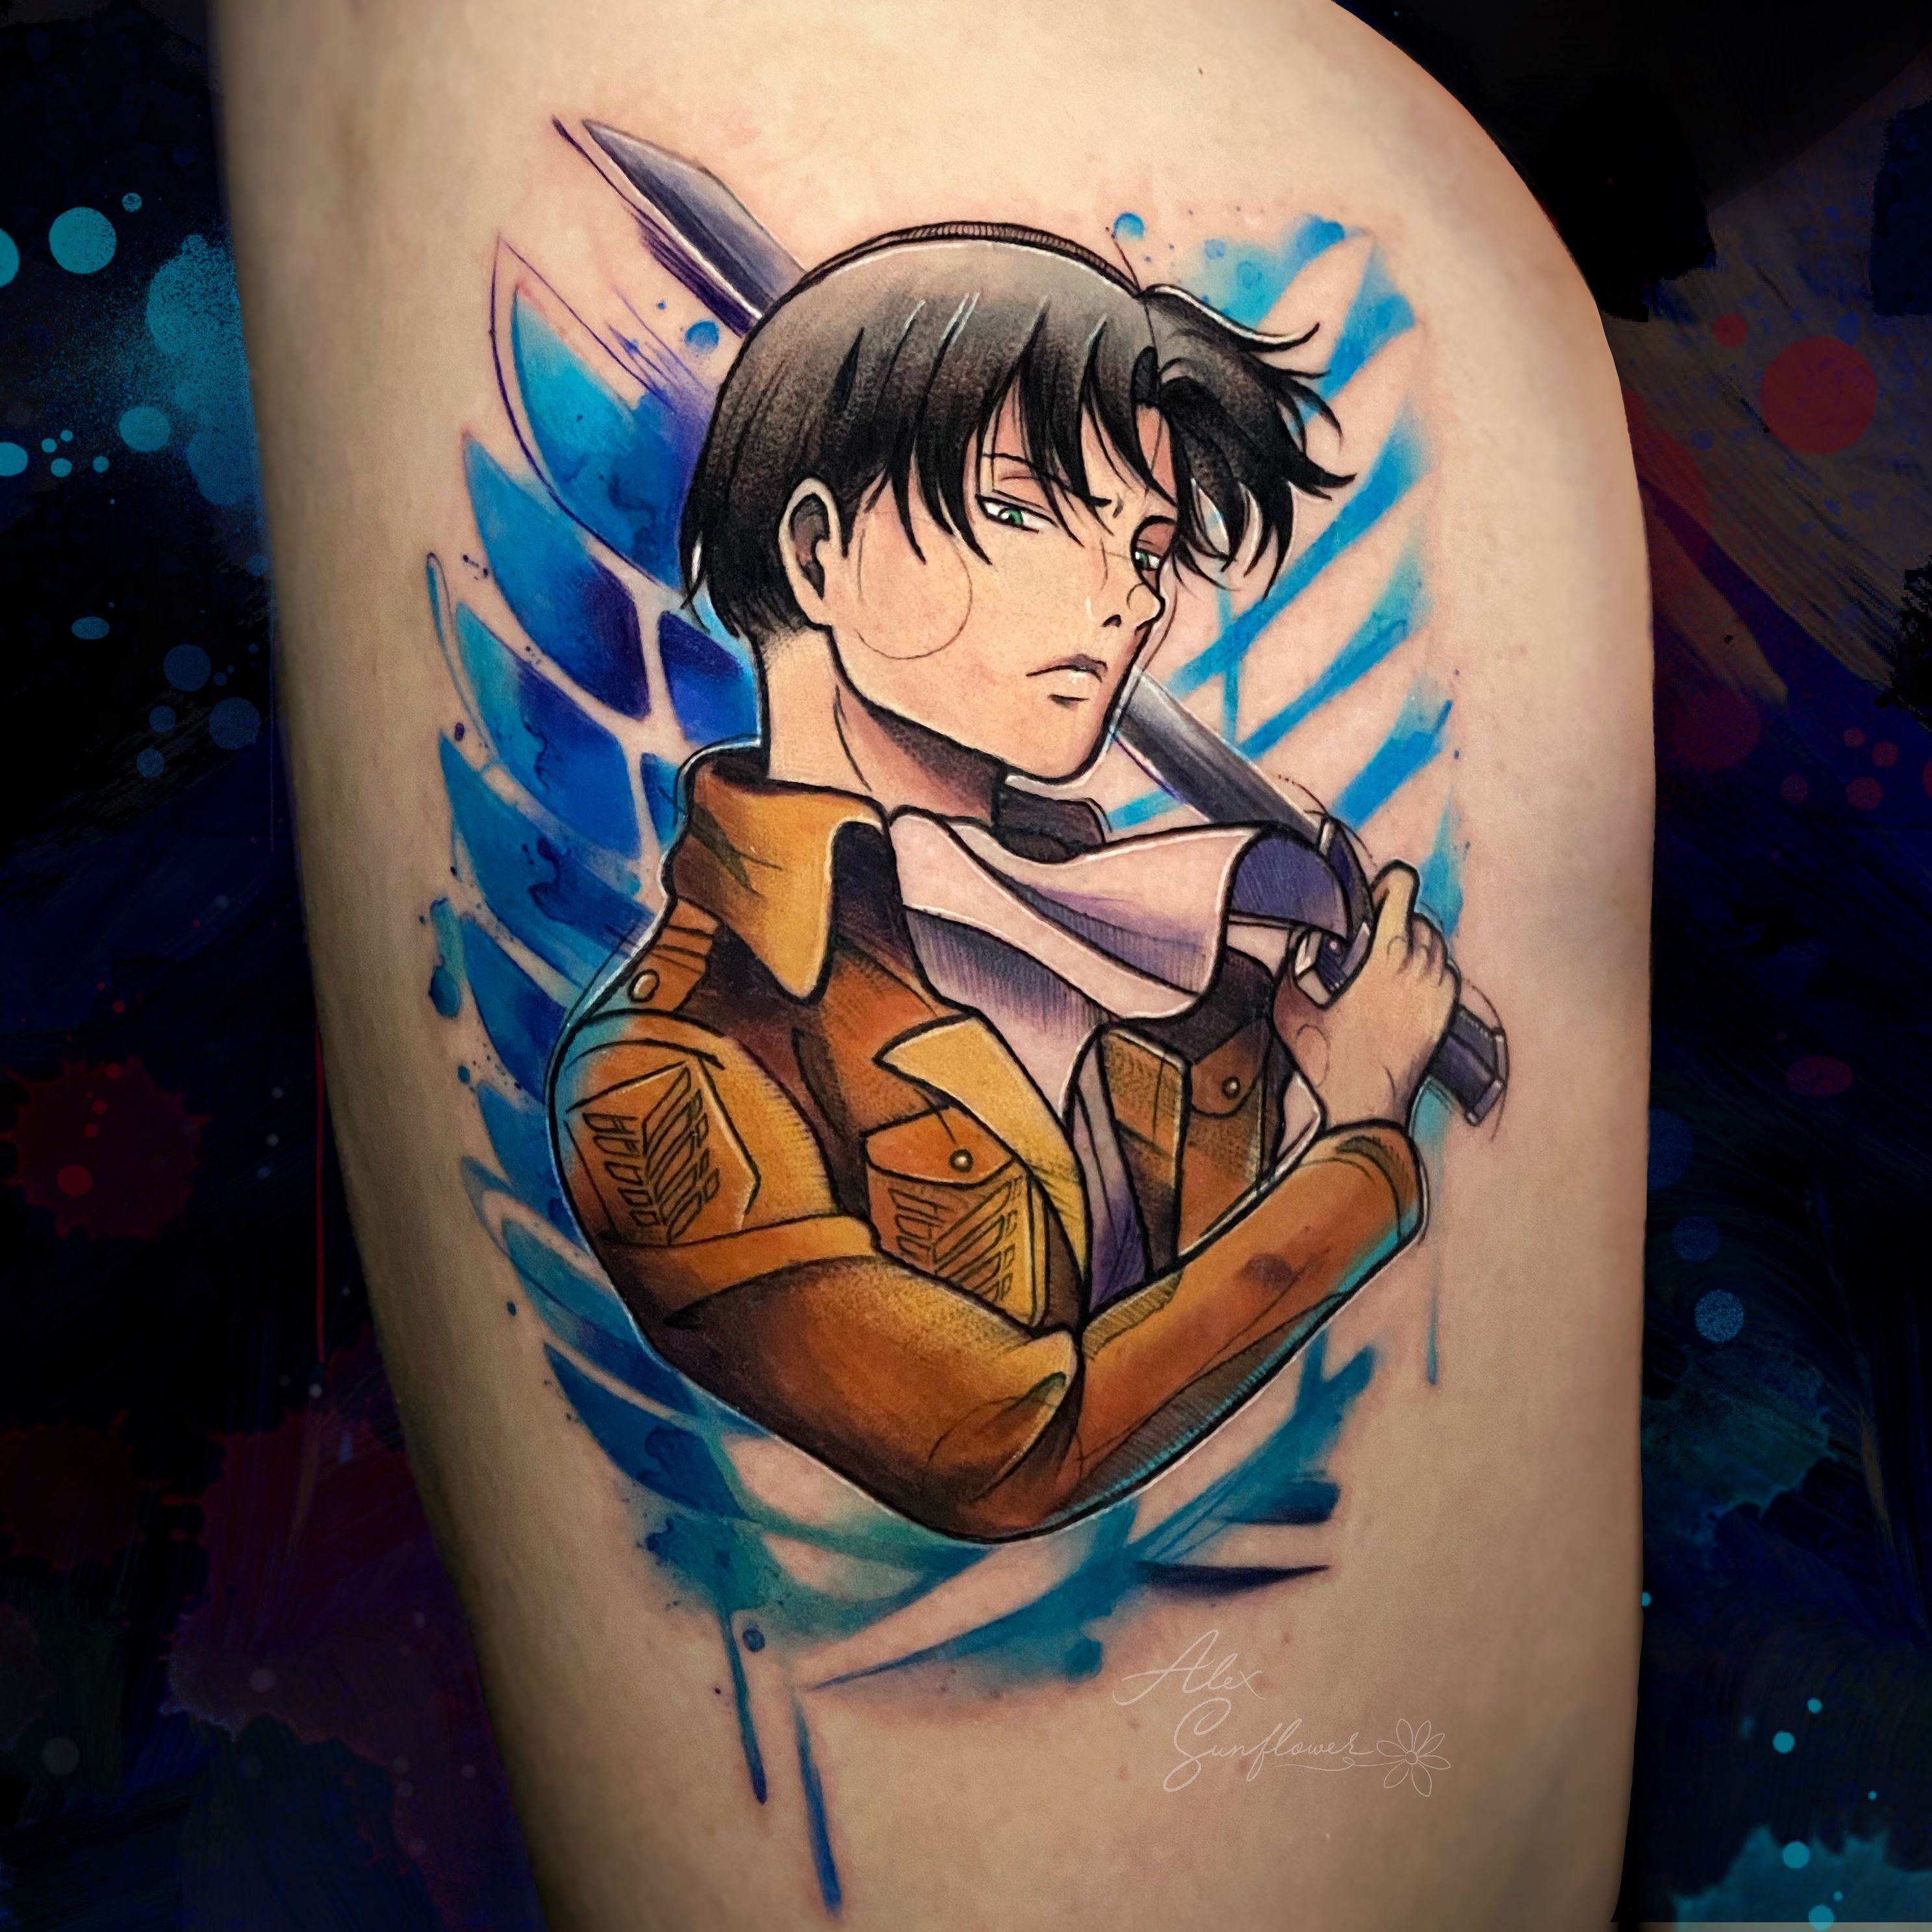 Finally got to do my first Attack on Titan tattoo Captain Levi forever   rattackontitan